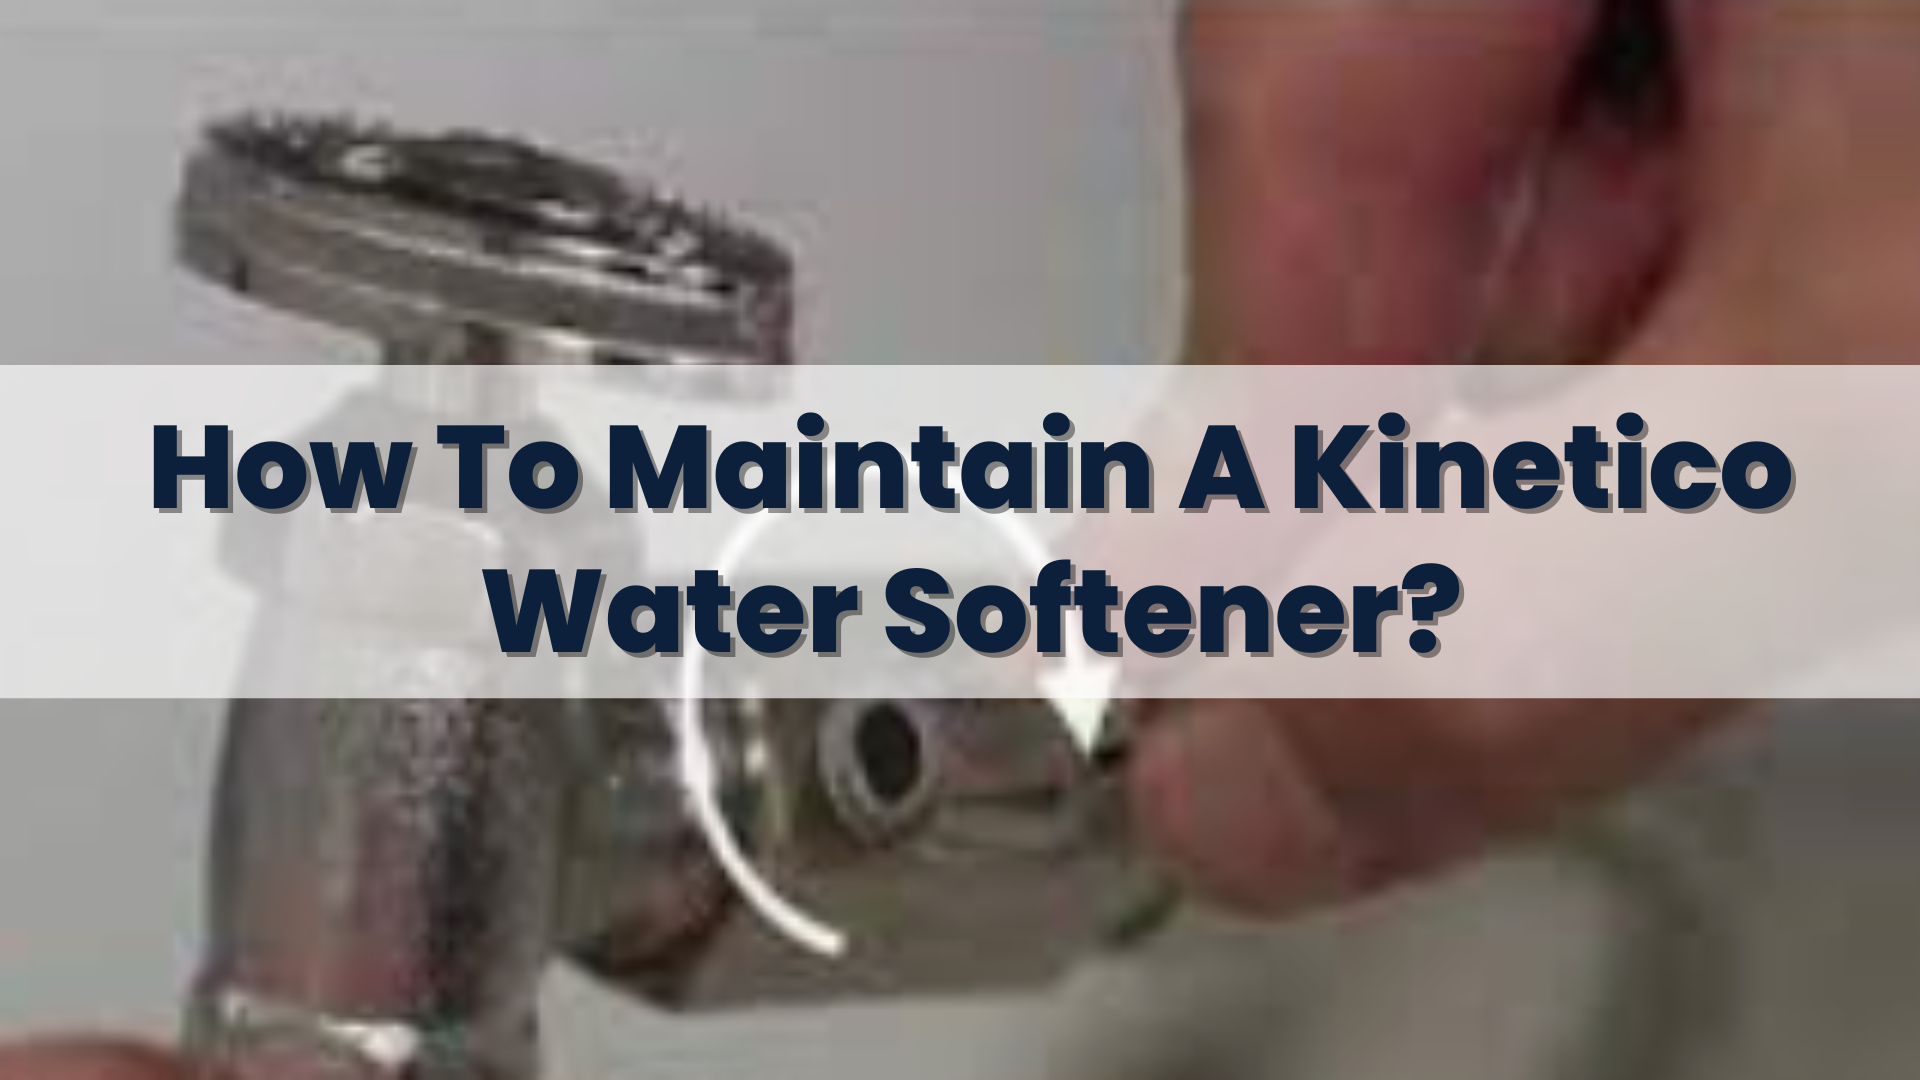 How To Maintain A Kinetico Water Softener